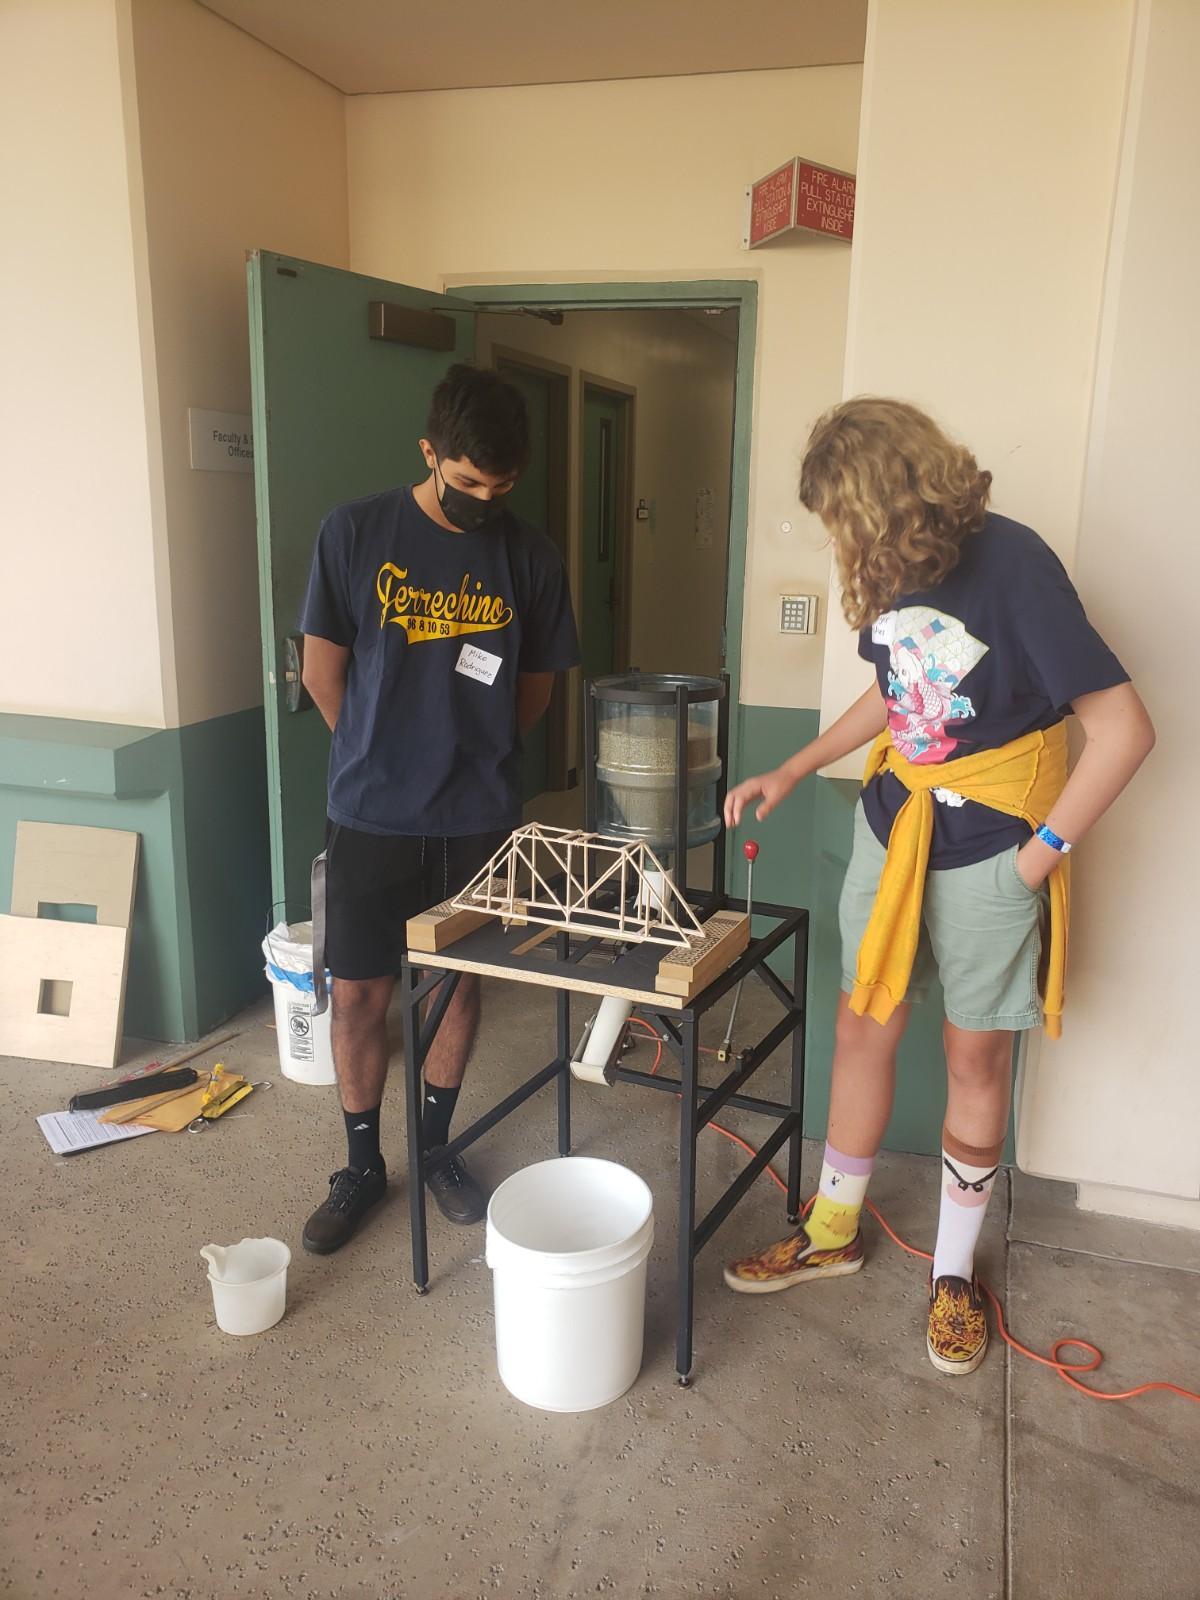 Mike Rodriguez and Sawyer Dunning Zeches working on bridge building